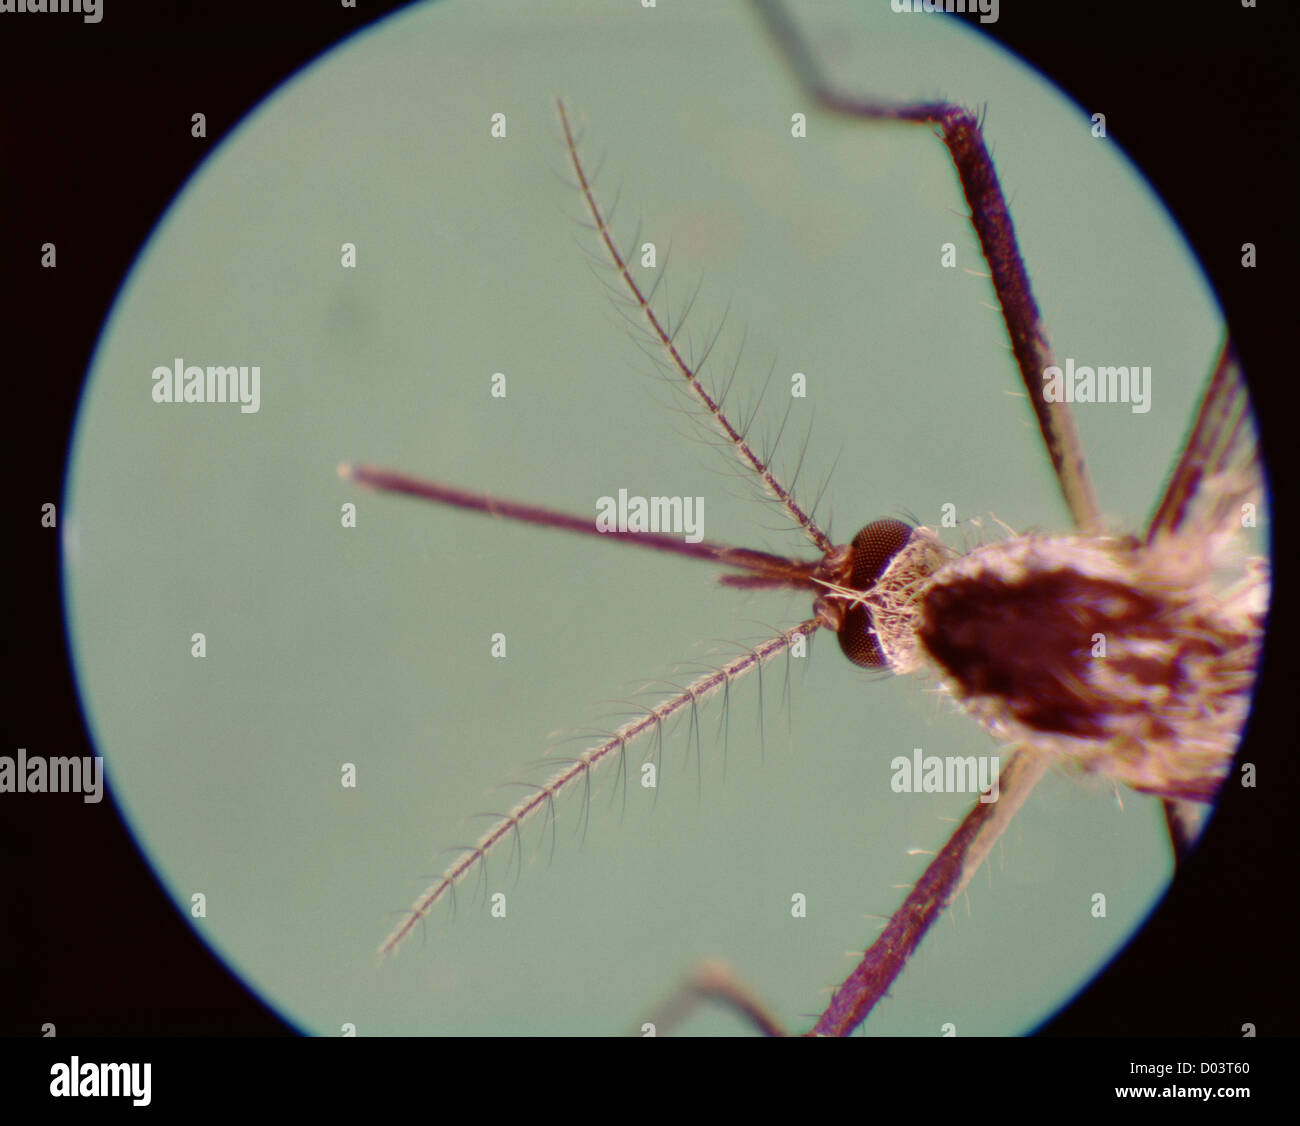 HOUSE MOSQUITO (CULEX PIPIENS) FEMALE MOSQUITO MOUTH PARTS AND ANTENNAE ADULT IS VECTOR FOR HUMAN DISEASES / STUDIO 17X Stock Photo